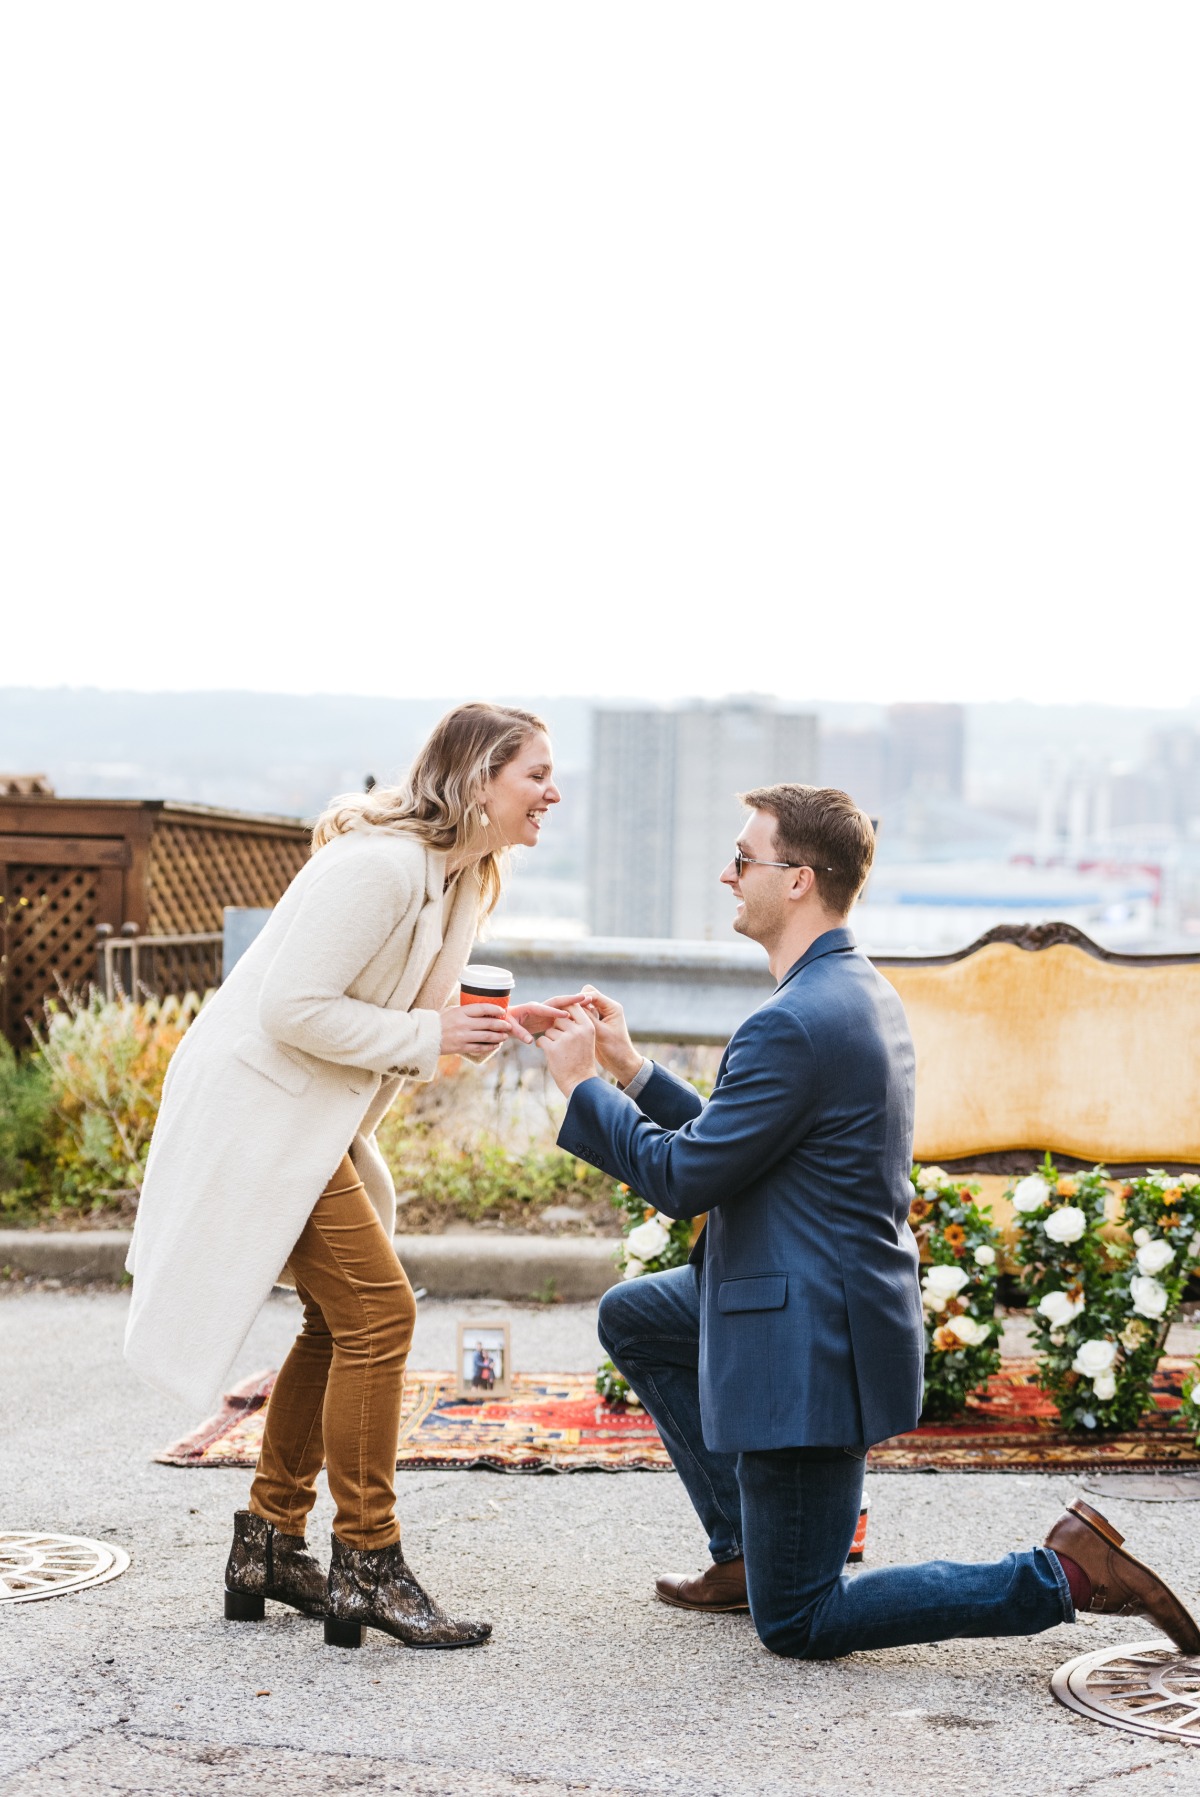 A Romantic Rooftop Proposal Inspired By A Broadway Classic